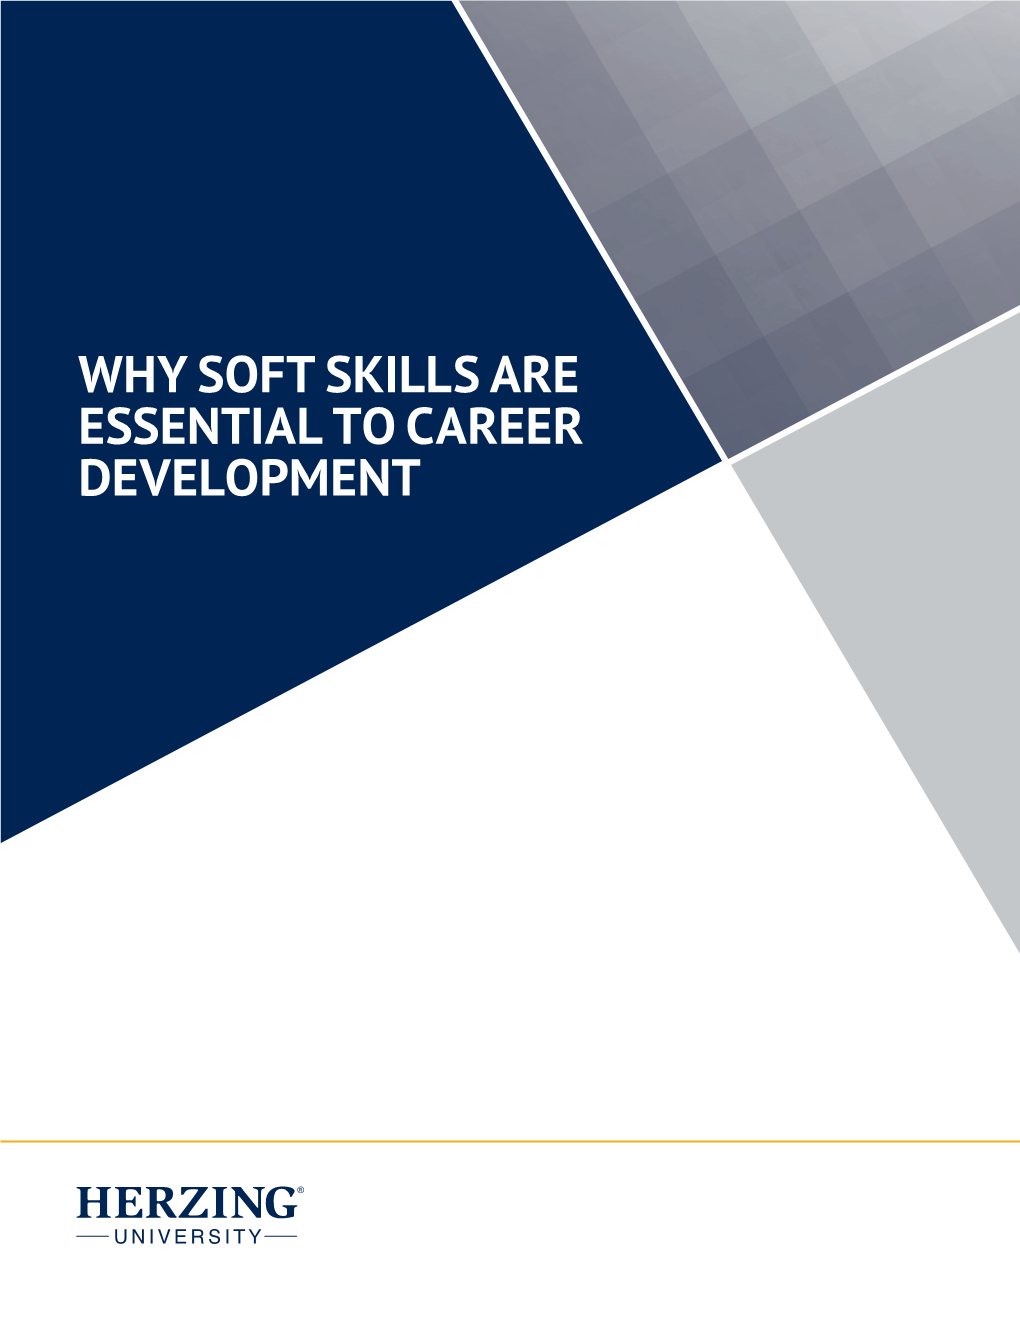 Why Soft Skills Are Essential to Career Development